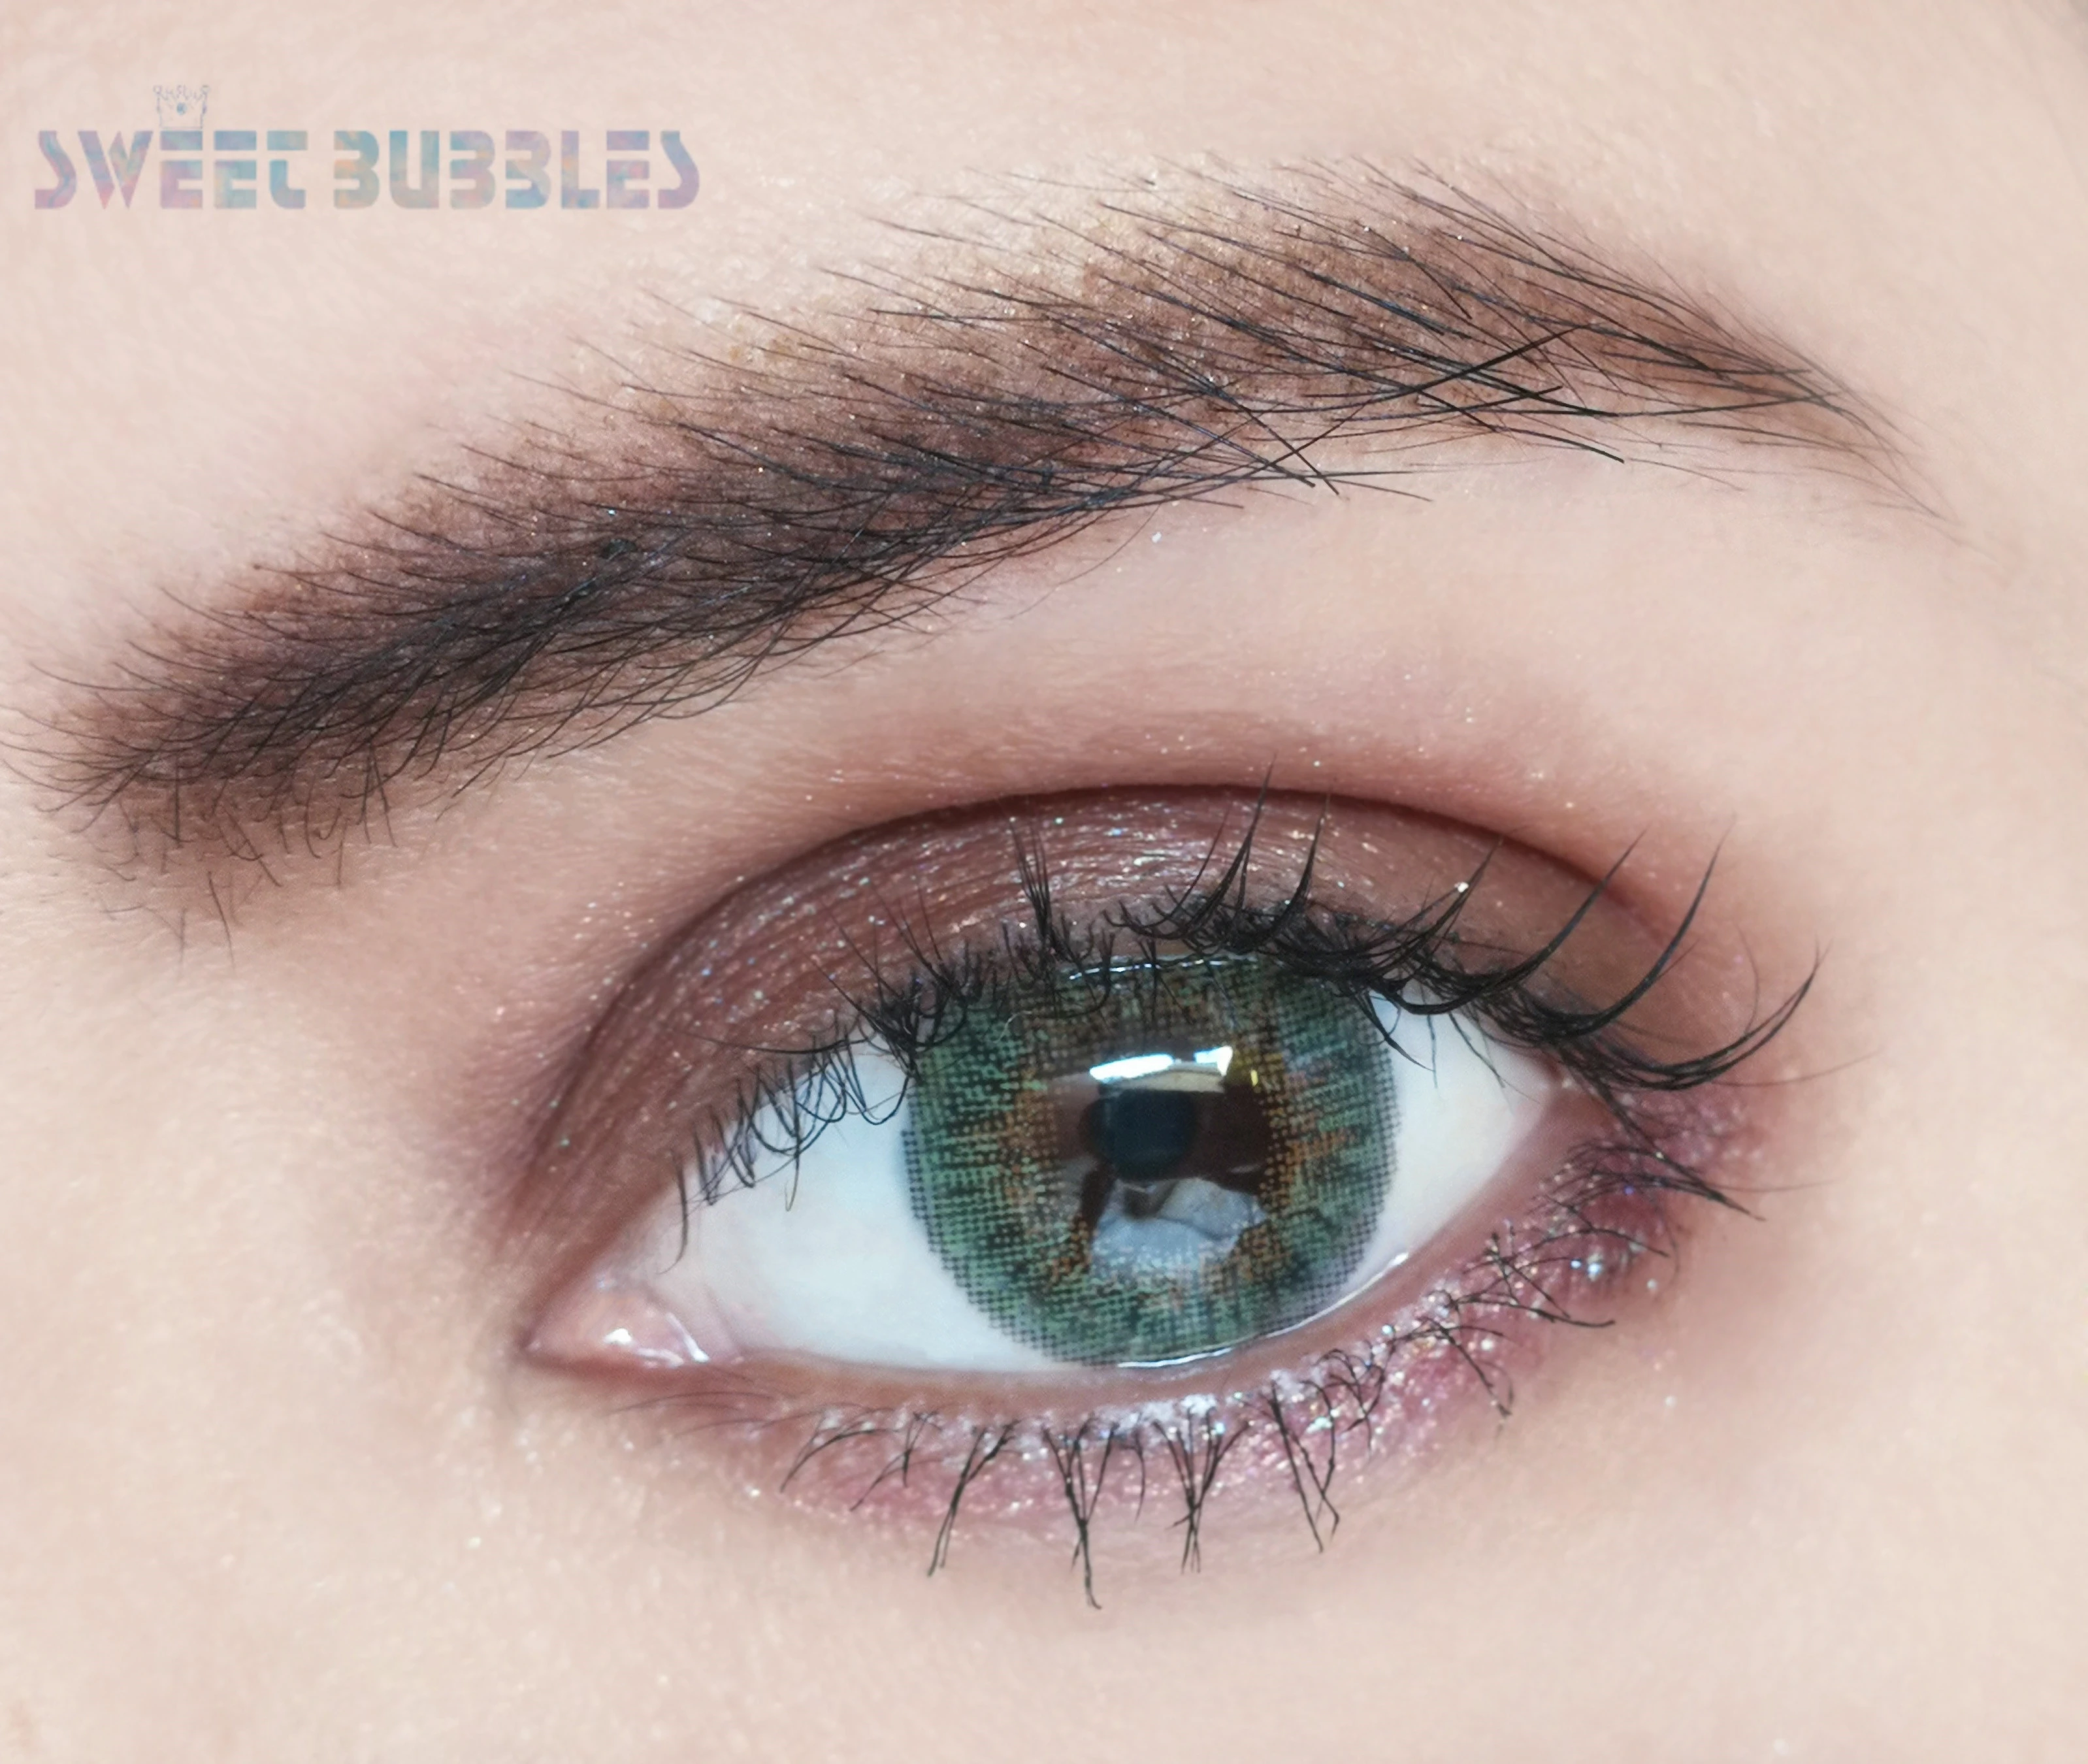 low moq Wholesale Cheap 1$ Circle Color Contacts 1 Year Soft Sweet Bubbless Eye Color Lens 3 Tone Coloured Contact Lenses